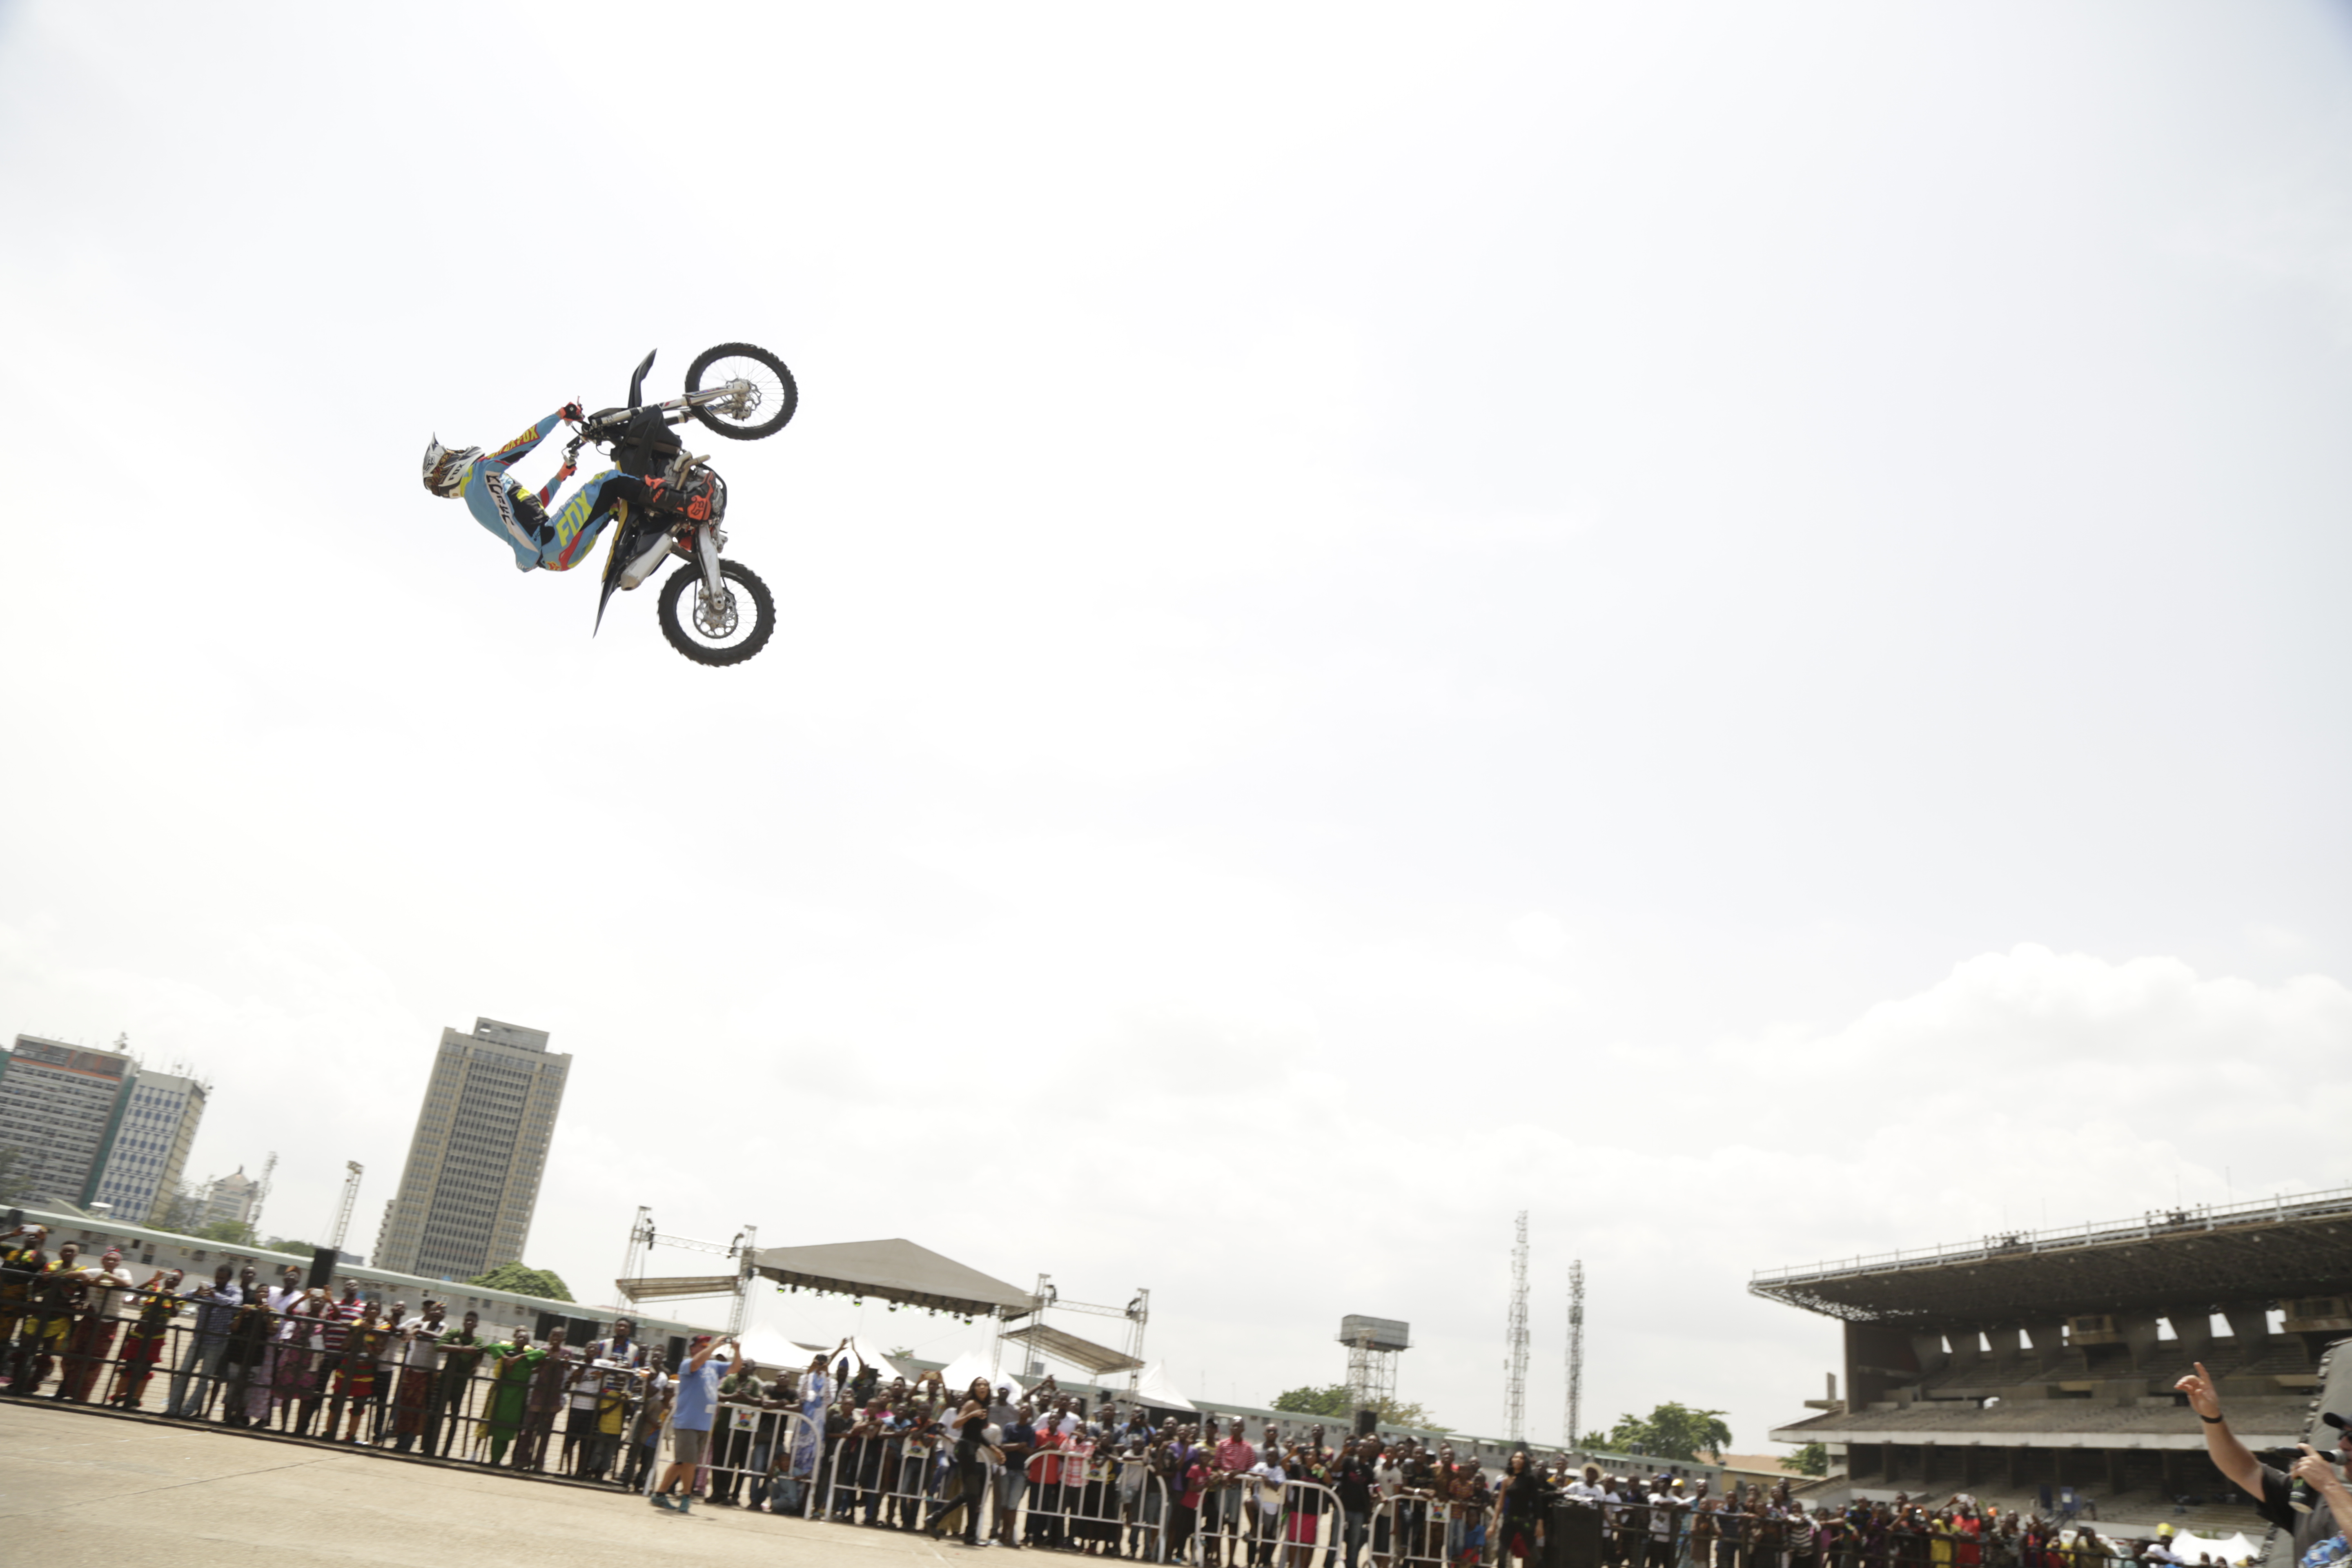 Motocross freestyle display during the Lagos Carnival as part of activities marking Lagos @ 50 celebrations at Tafawa Balewa Square (TBS), Lagos, on Saturday, May 13, 2017.